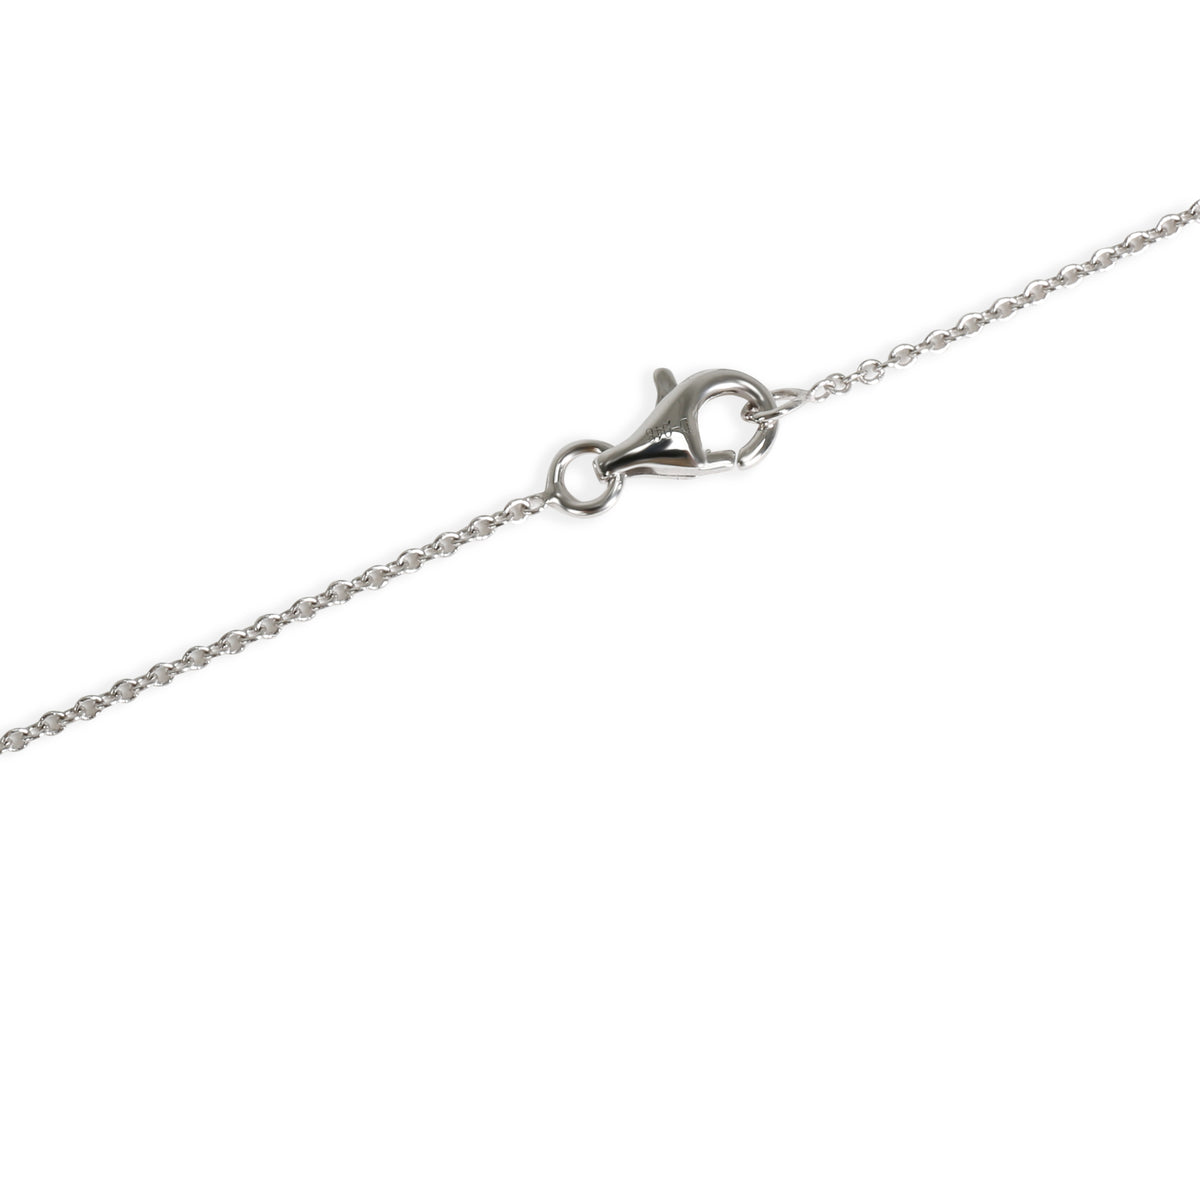 Nicole Rose Arc Diamond Curved Bar Necklace in 18K White Gold 0.48 CTW